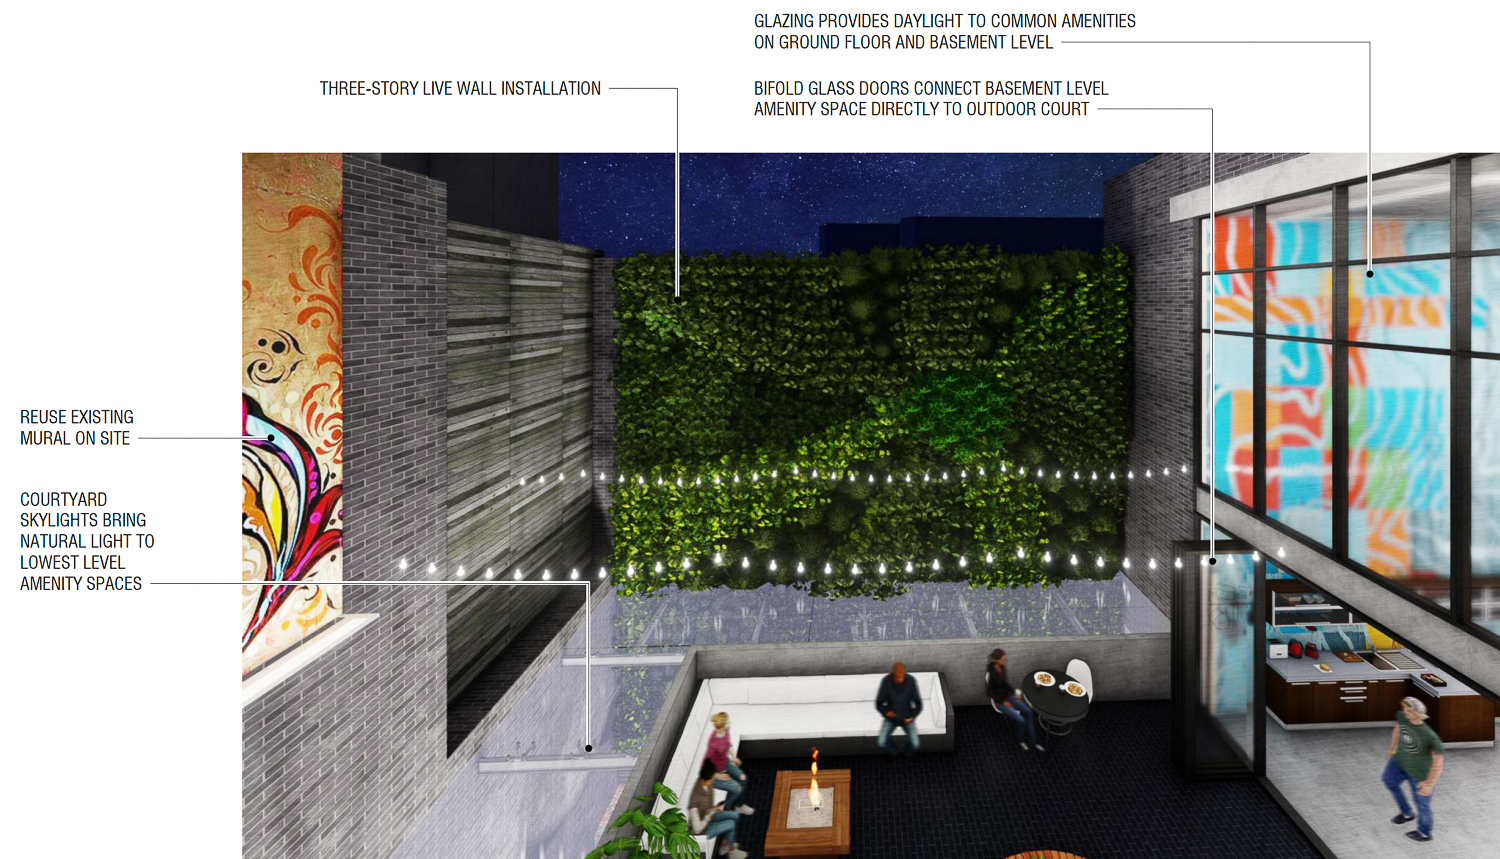 1500 15th Street courtyard, showcasing the placement of a street mural to be preserved, rendering by Prime Design